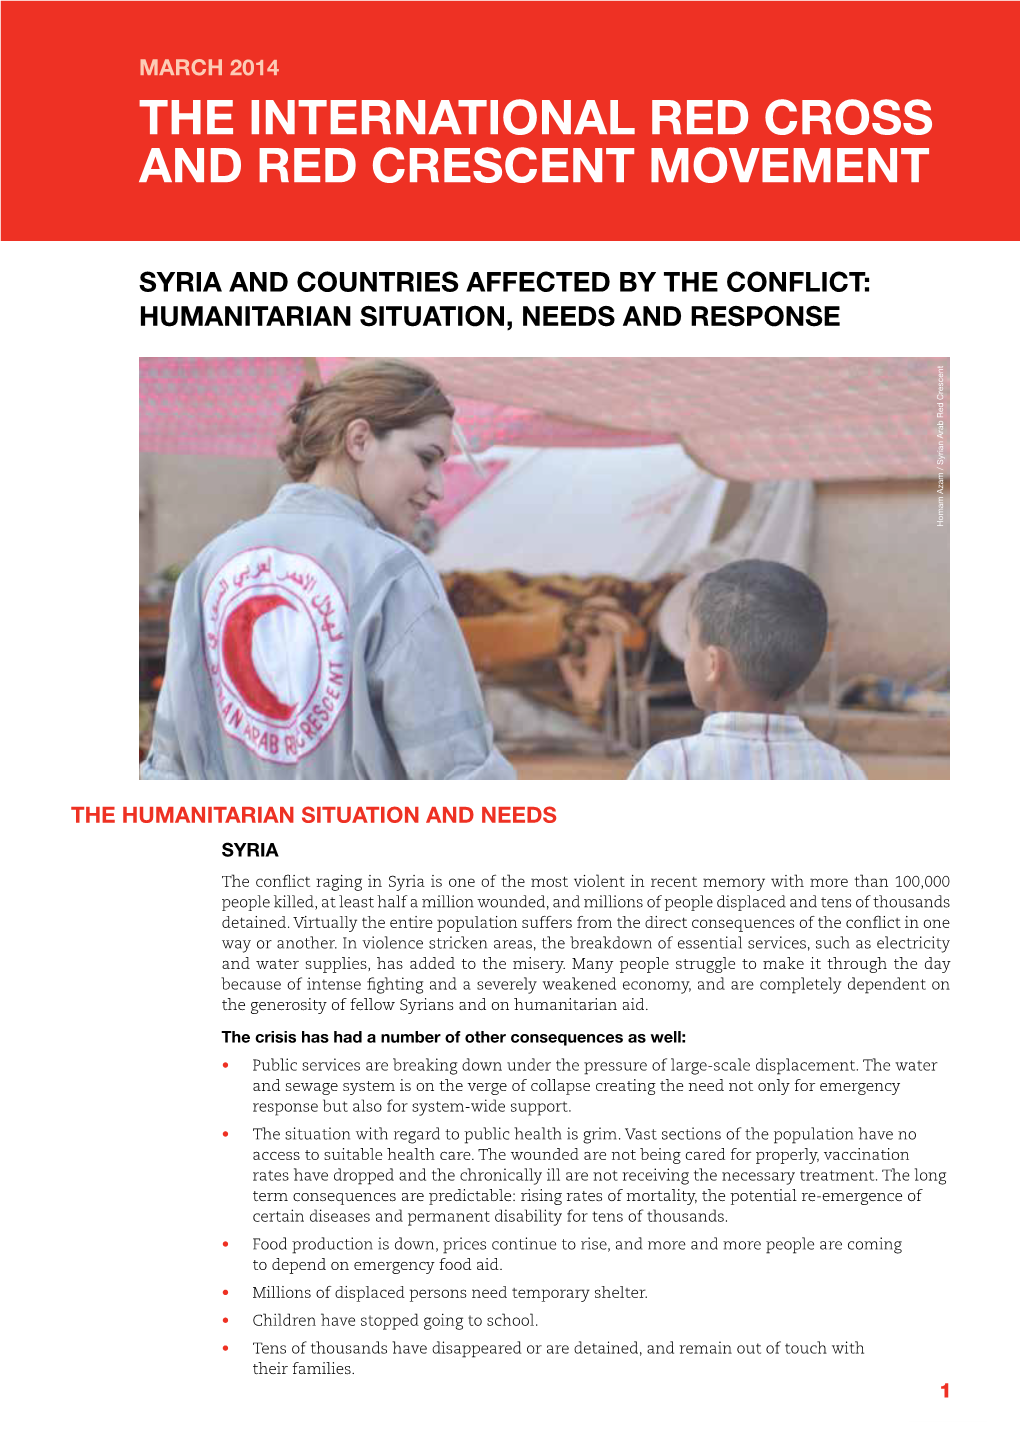 The International Red Cross and Red Crescent Movement